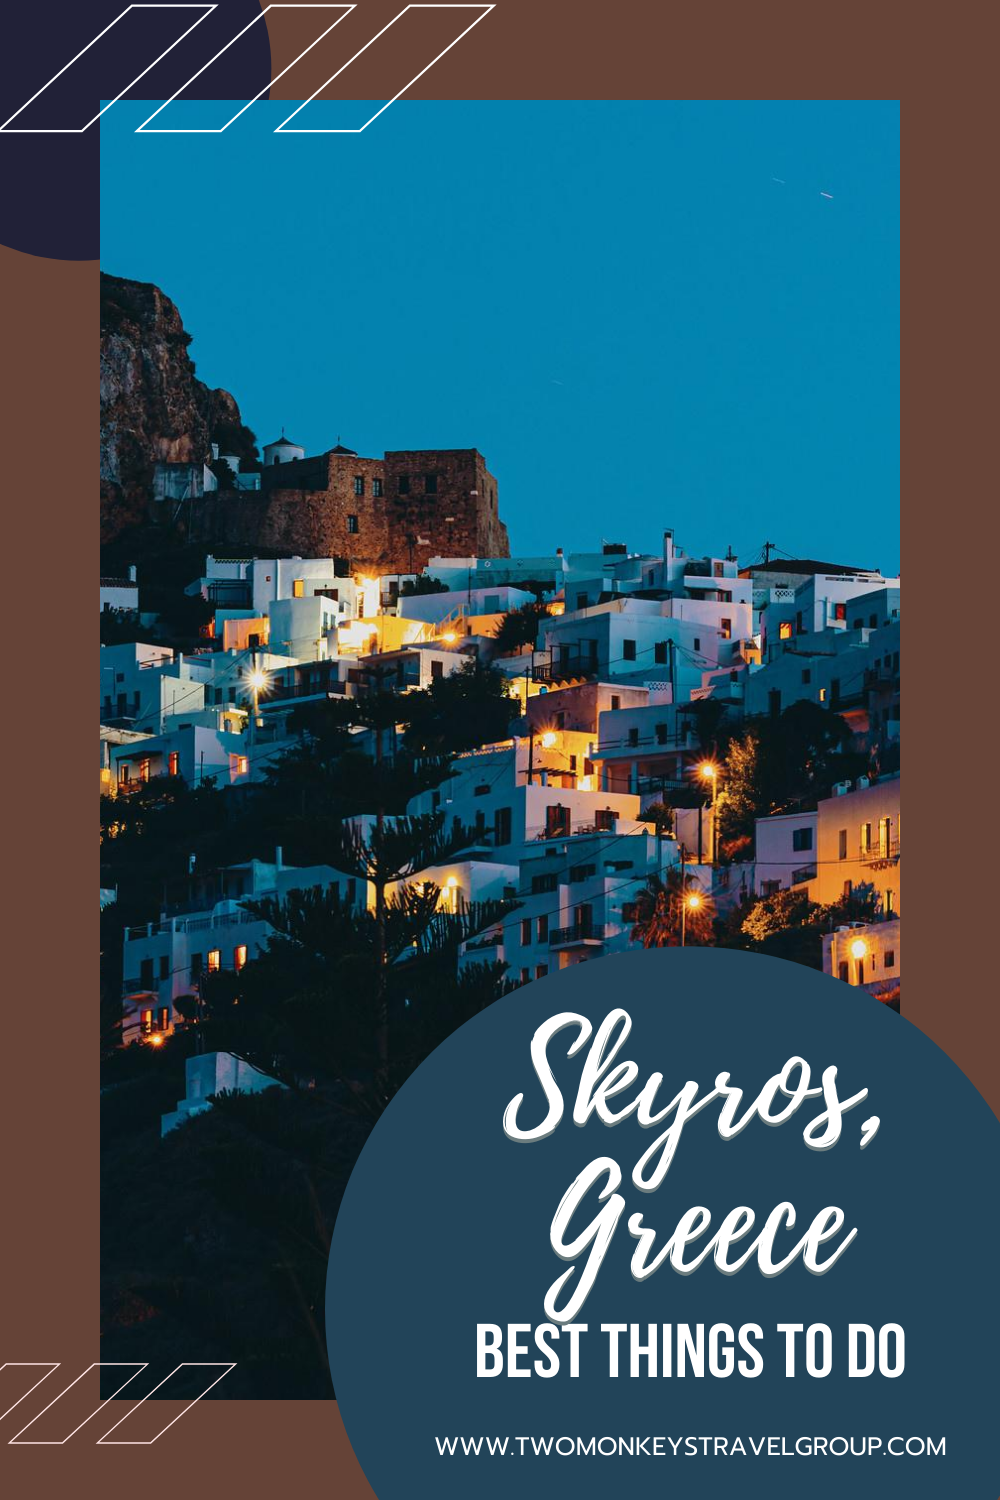 10 Best Things to do in Skyros, Greece [with Suggested Tours]